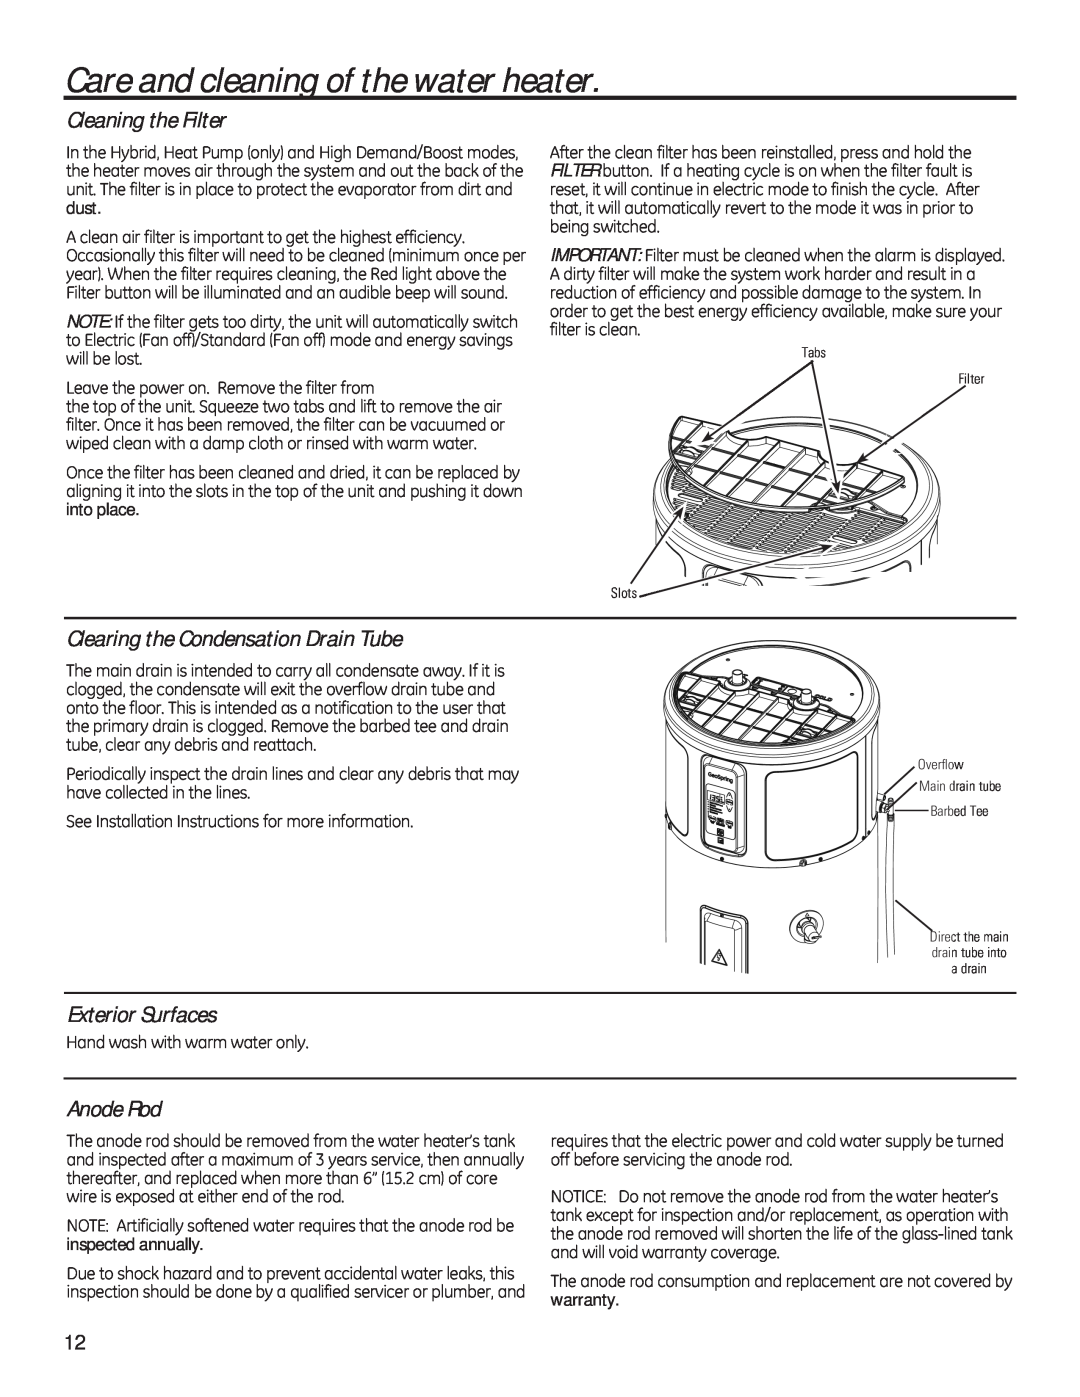 GE 49-50292 Care and cleaning of the water heater, Cleaning the Filter, Clearing the Condensation Drain Tube, Anode Rod 